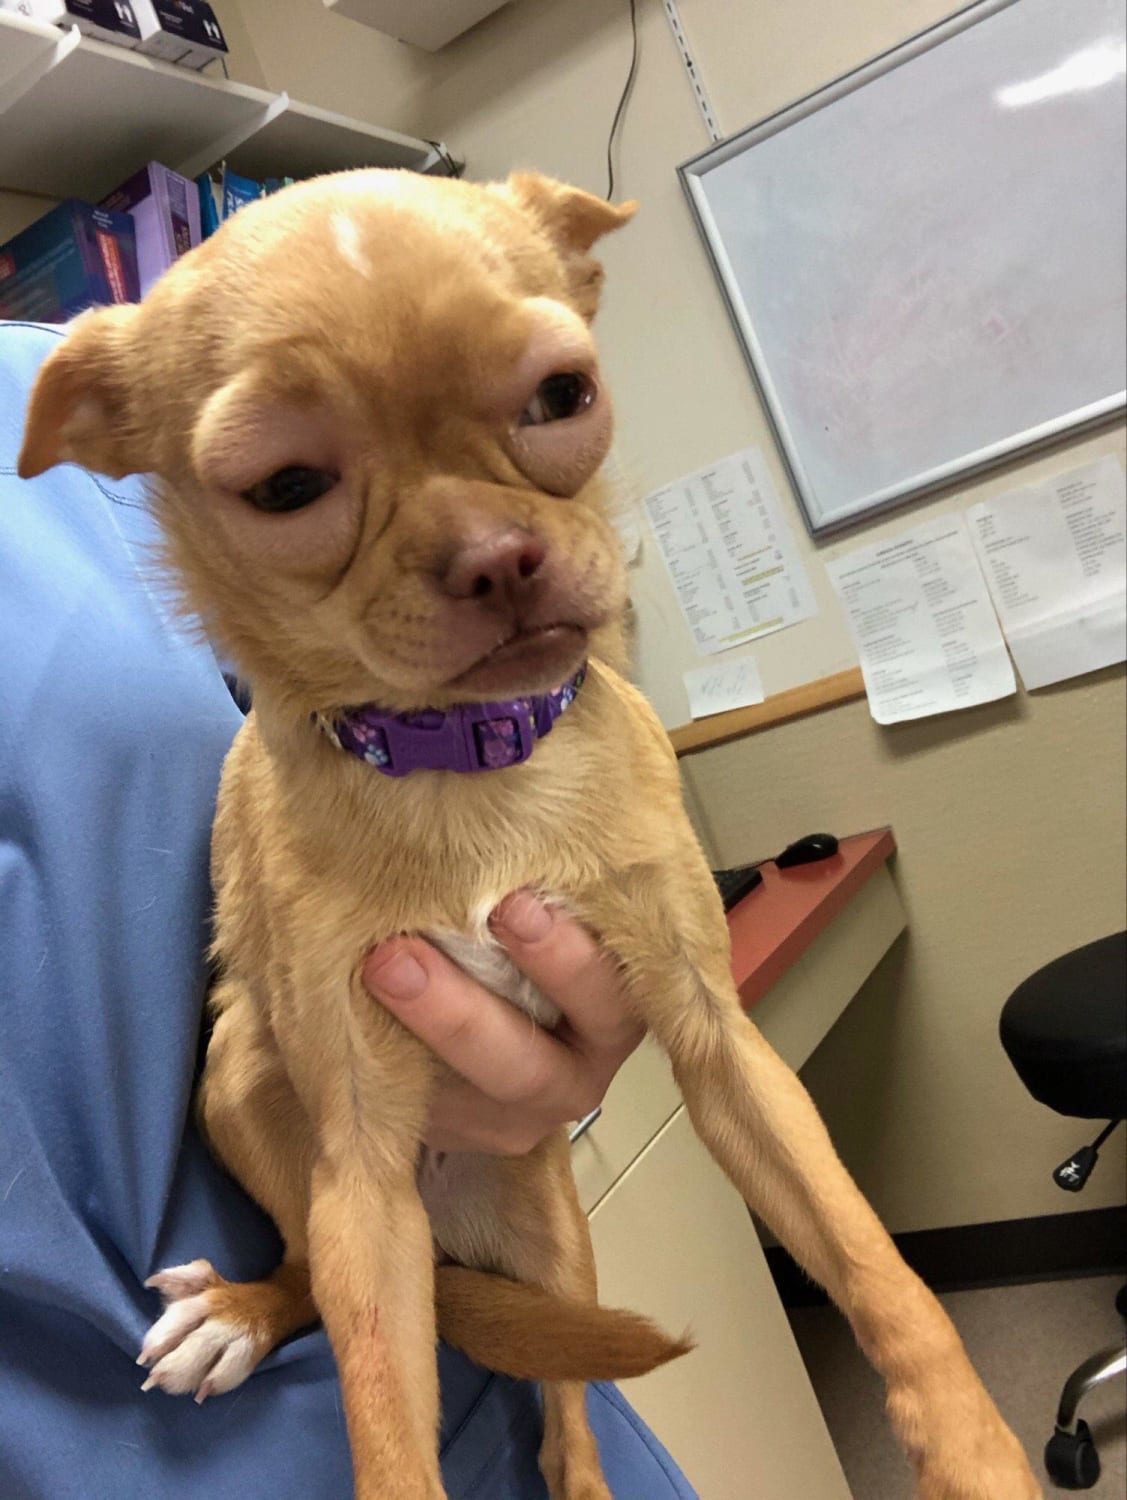 PsBattle: This dog who had an allergic reaction while at the vet